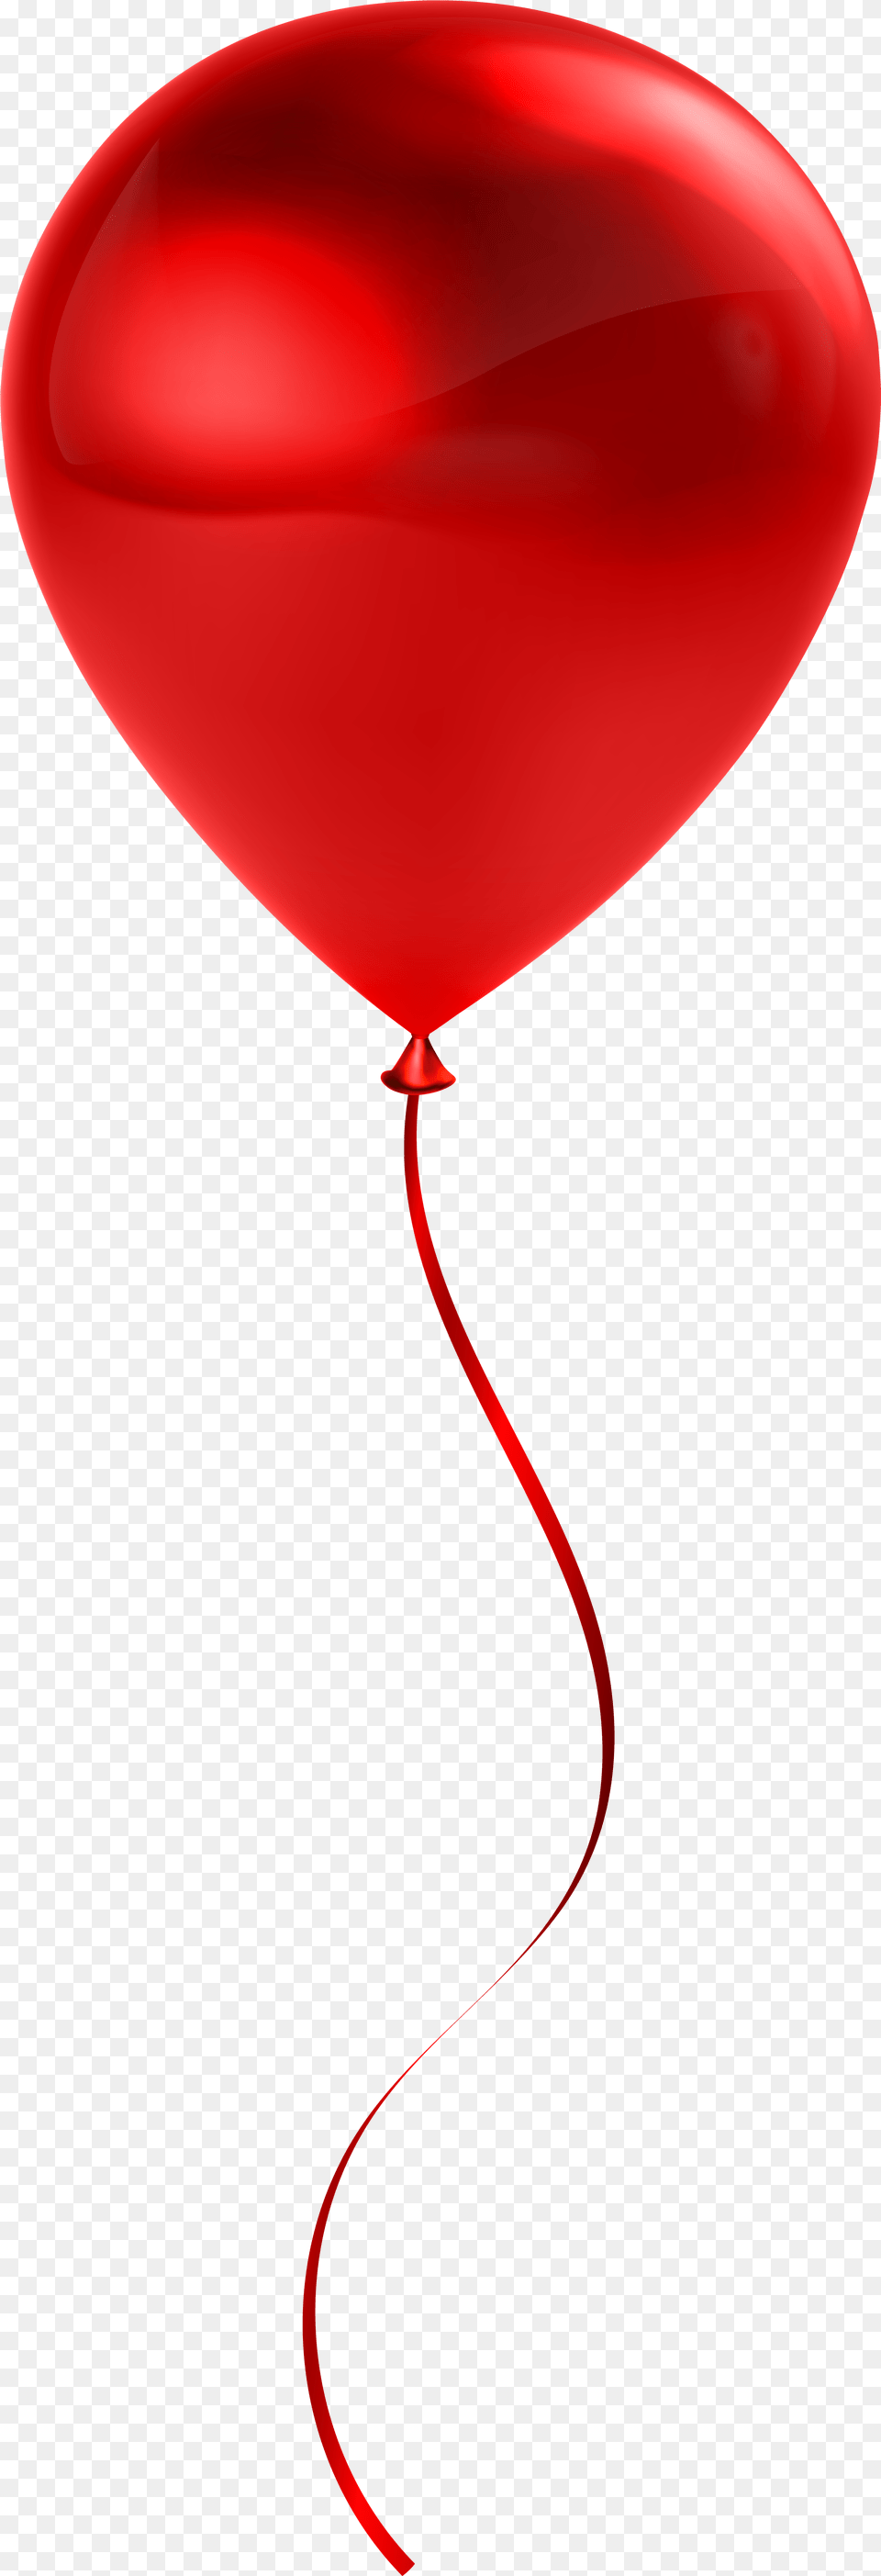 Background Red Balloon Clip Art Realistic Red Balloons Free Transparent Png